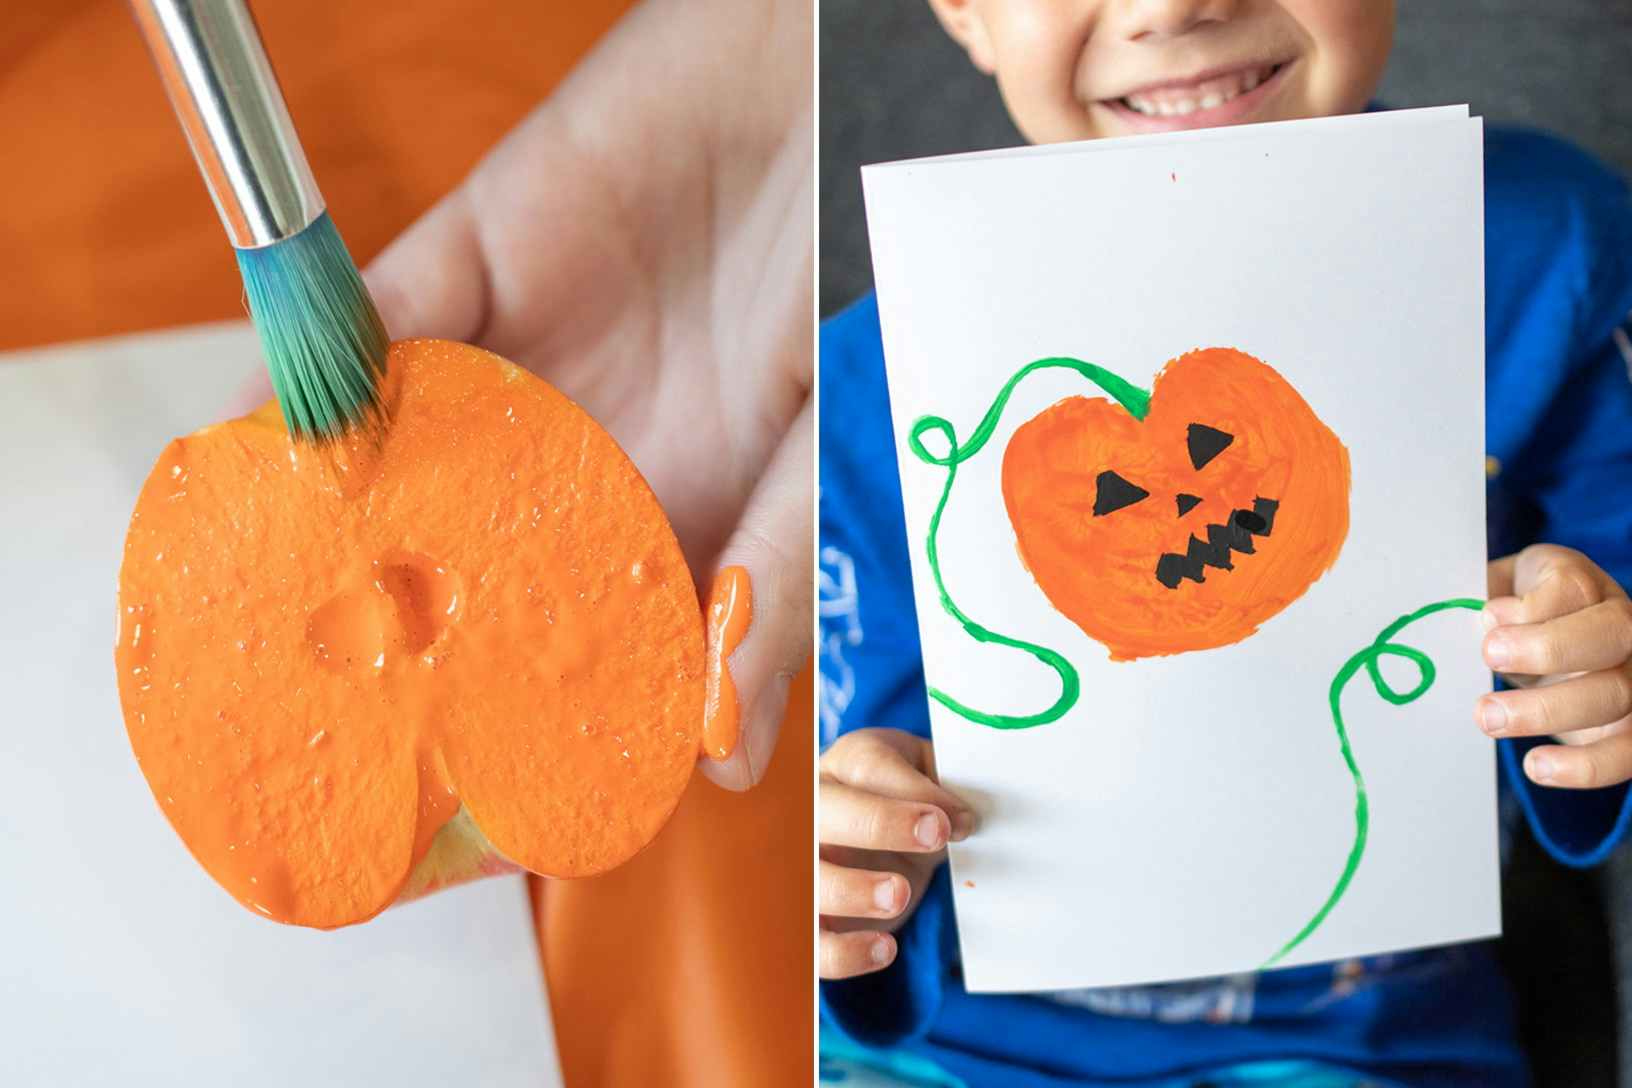 Two photos side by side; A person painting orange paint onto the front of an apple cut in half. A child holding a white card with a pumpkin jack-o'-lantern painted on the front.